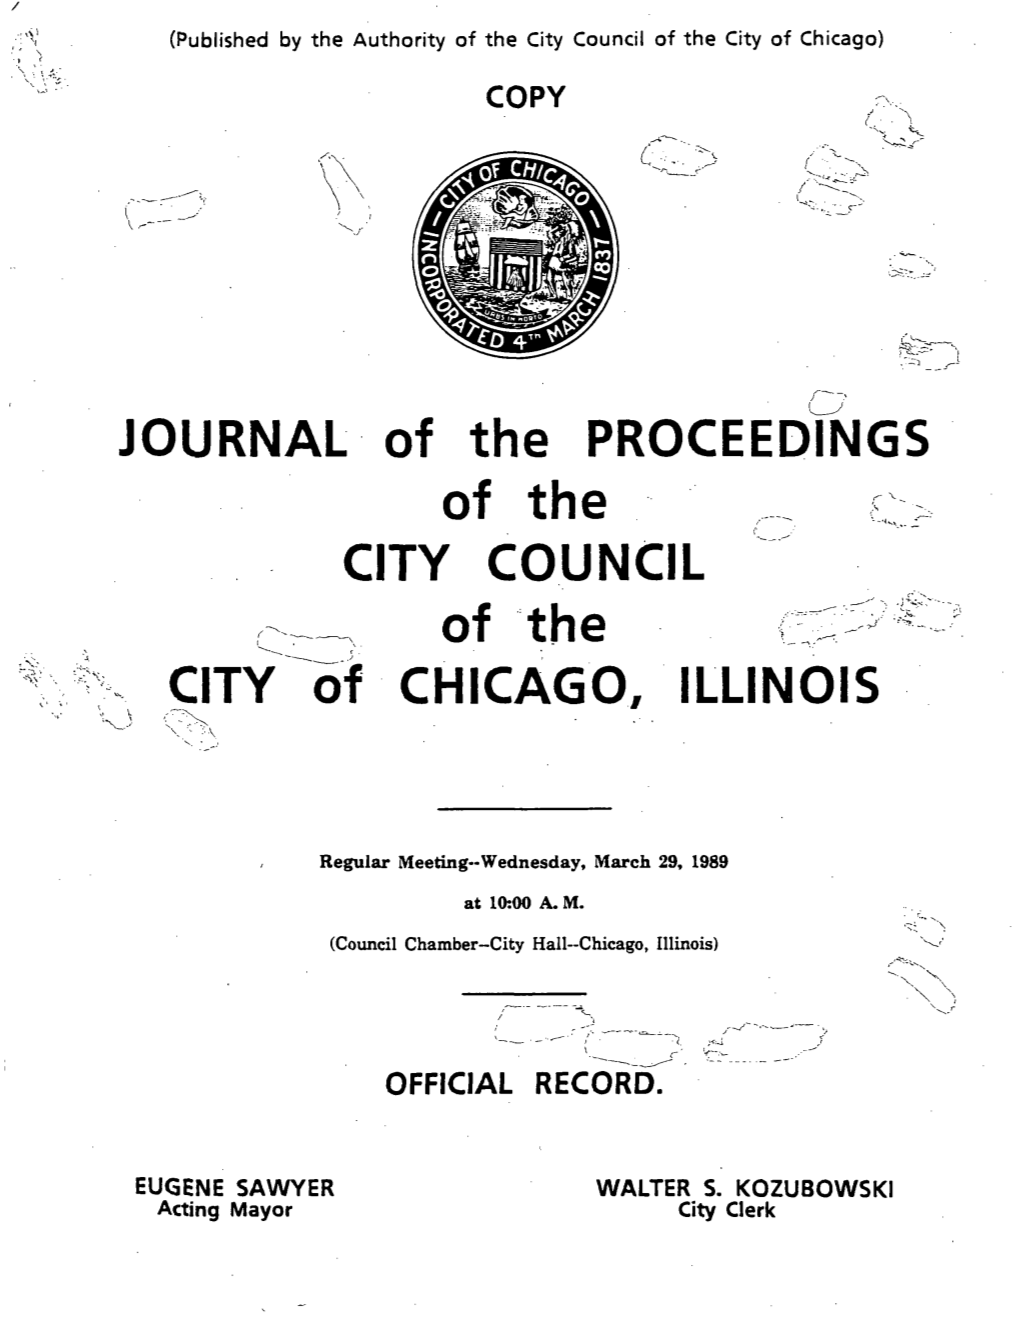 JOURNAL of the PROCEEDINGS of the F - CITY COUNCIL E^ of the V - * CITY of CHICAGO, ILLINOIS